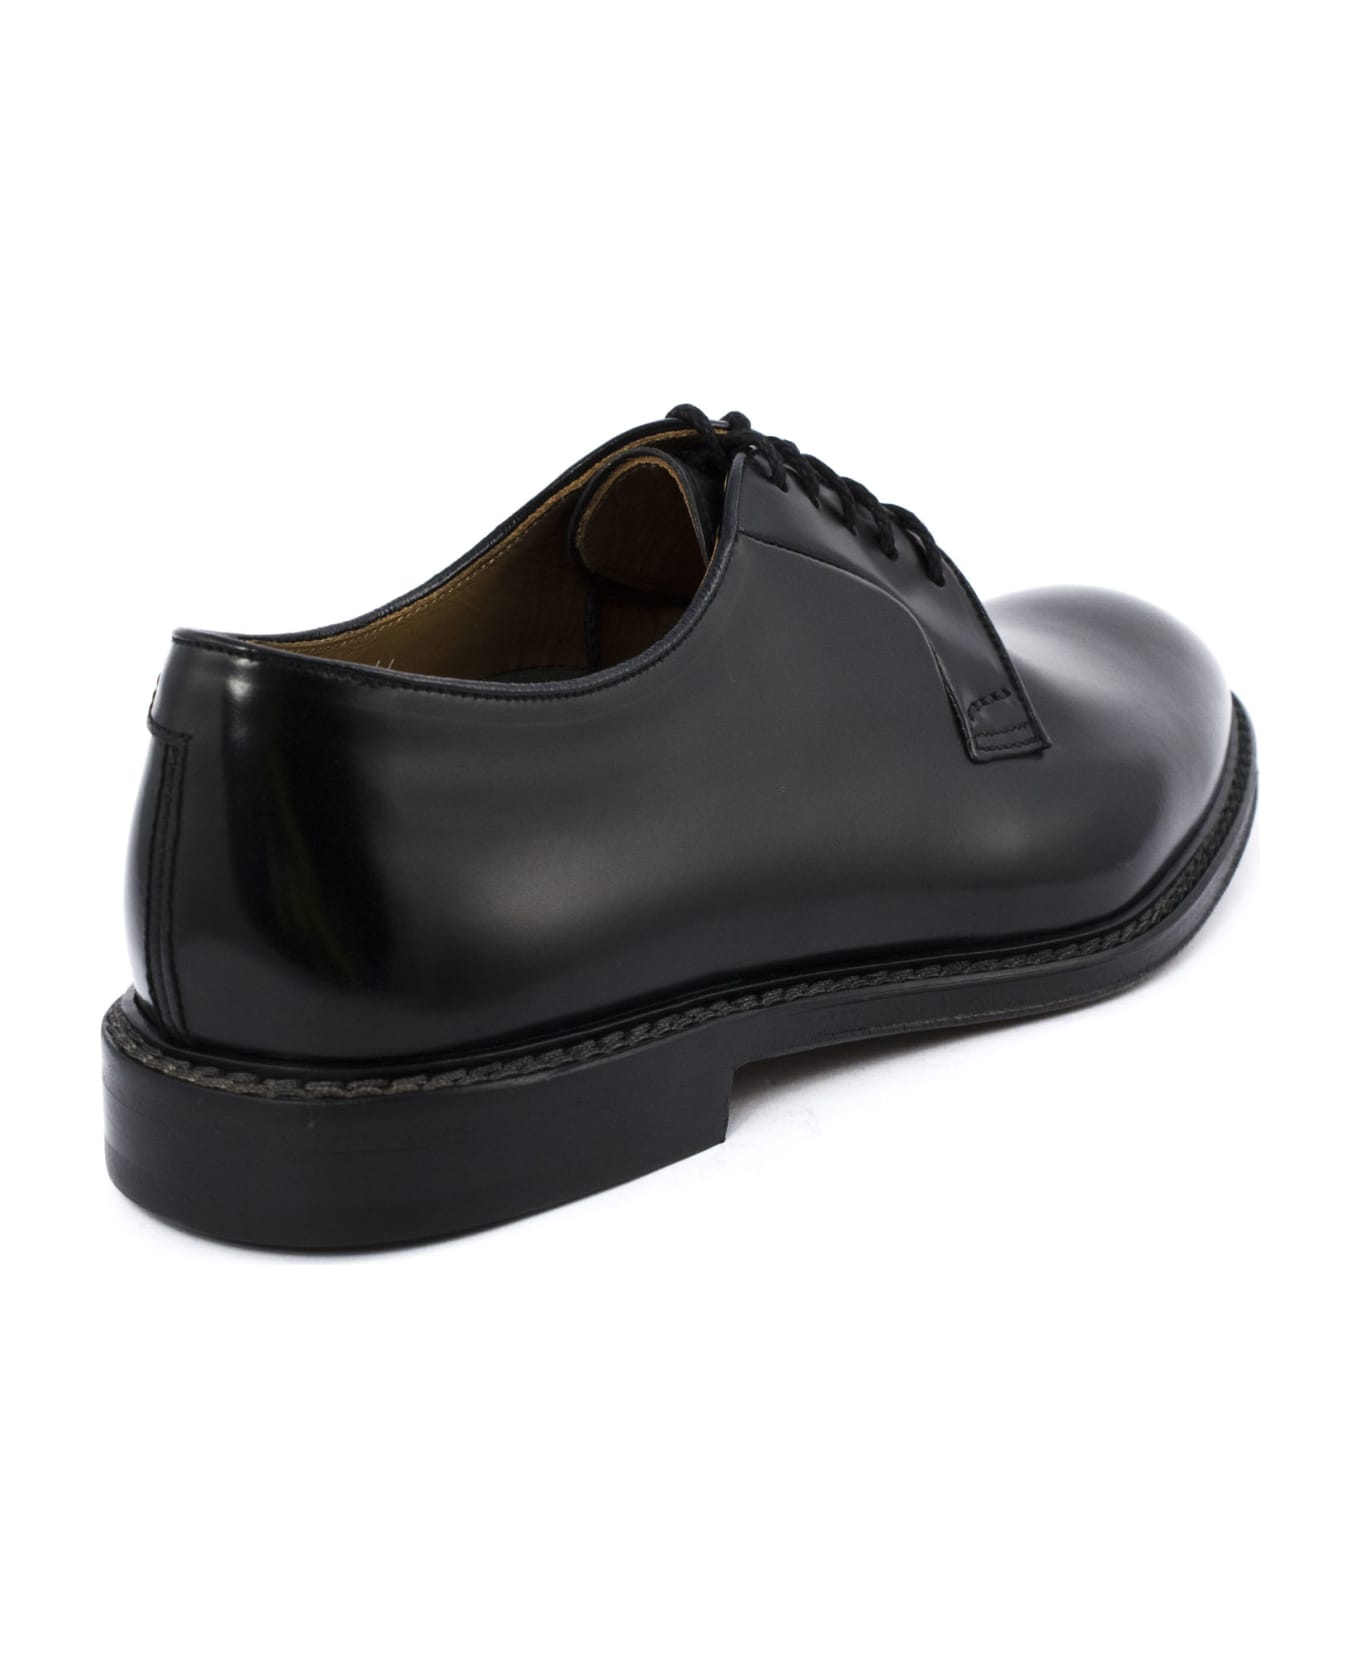 Doucal's Black Semi-glossy Leather Derby Shoes - Black ローファー＆デッキシューズ